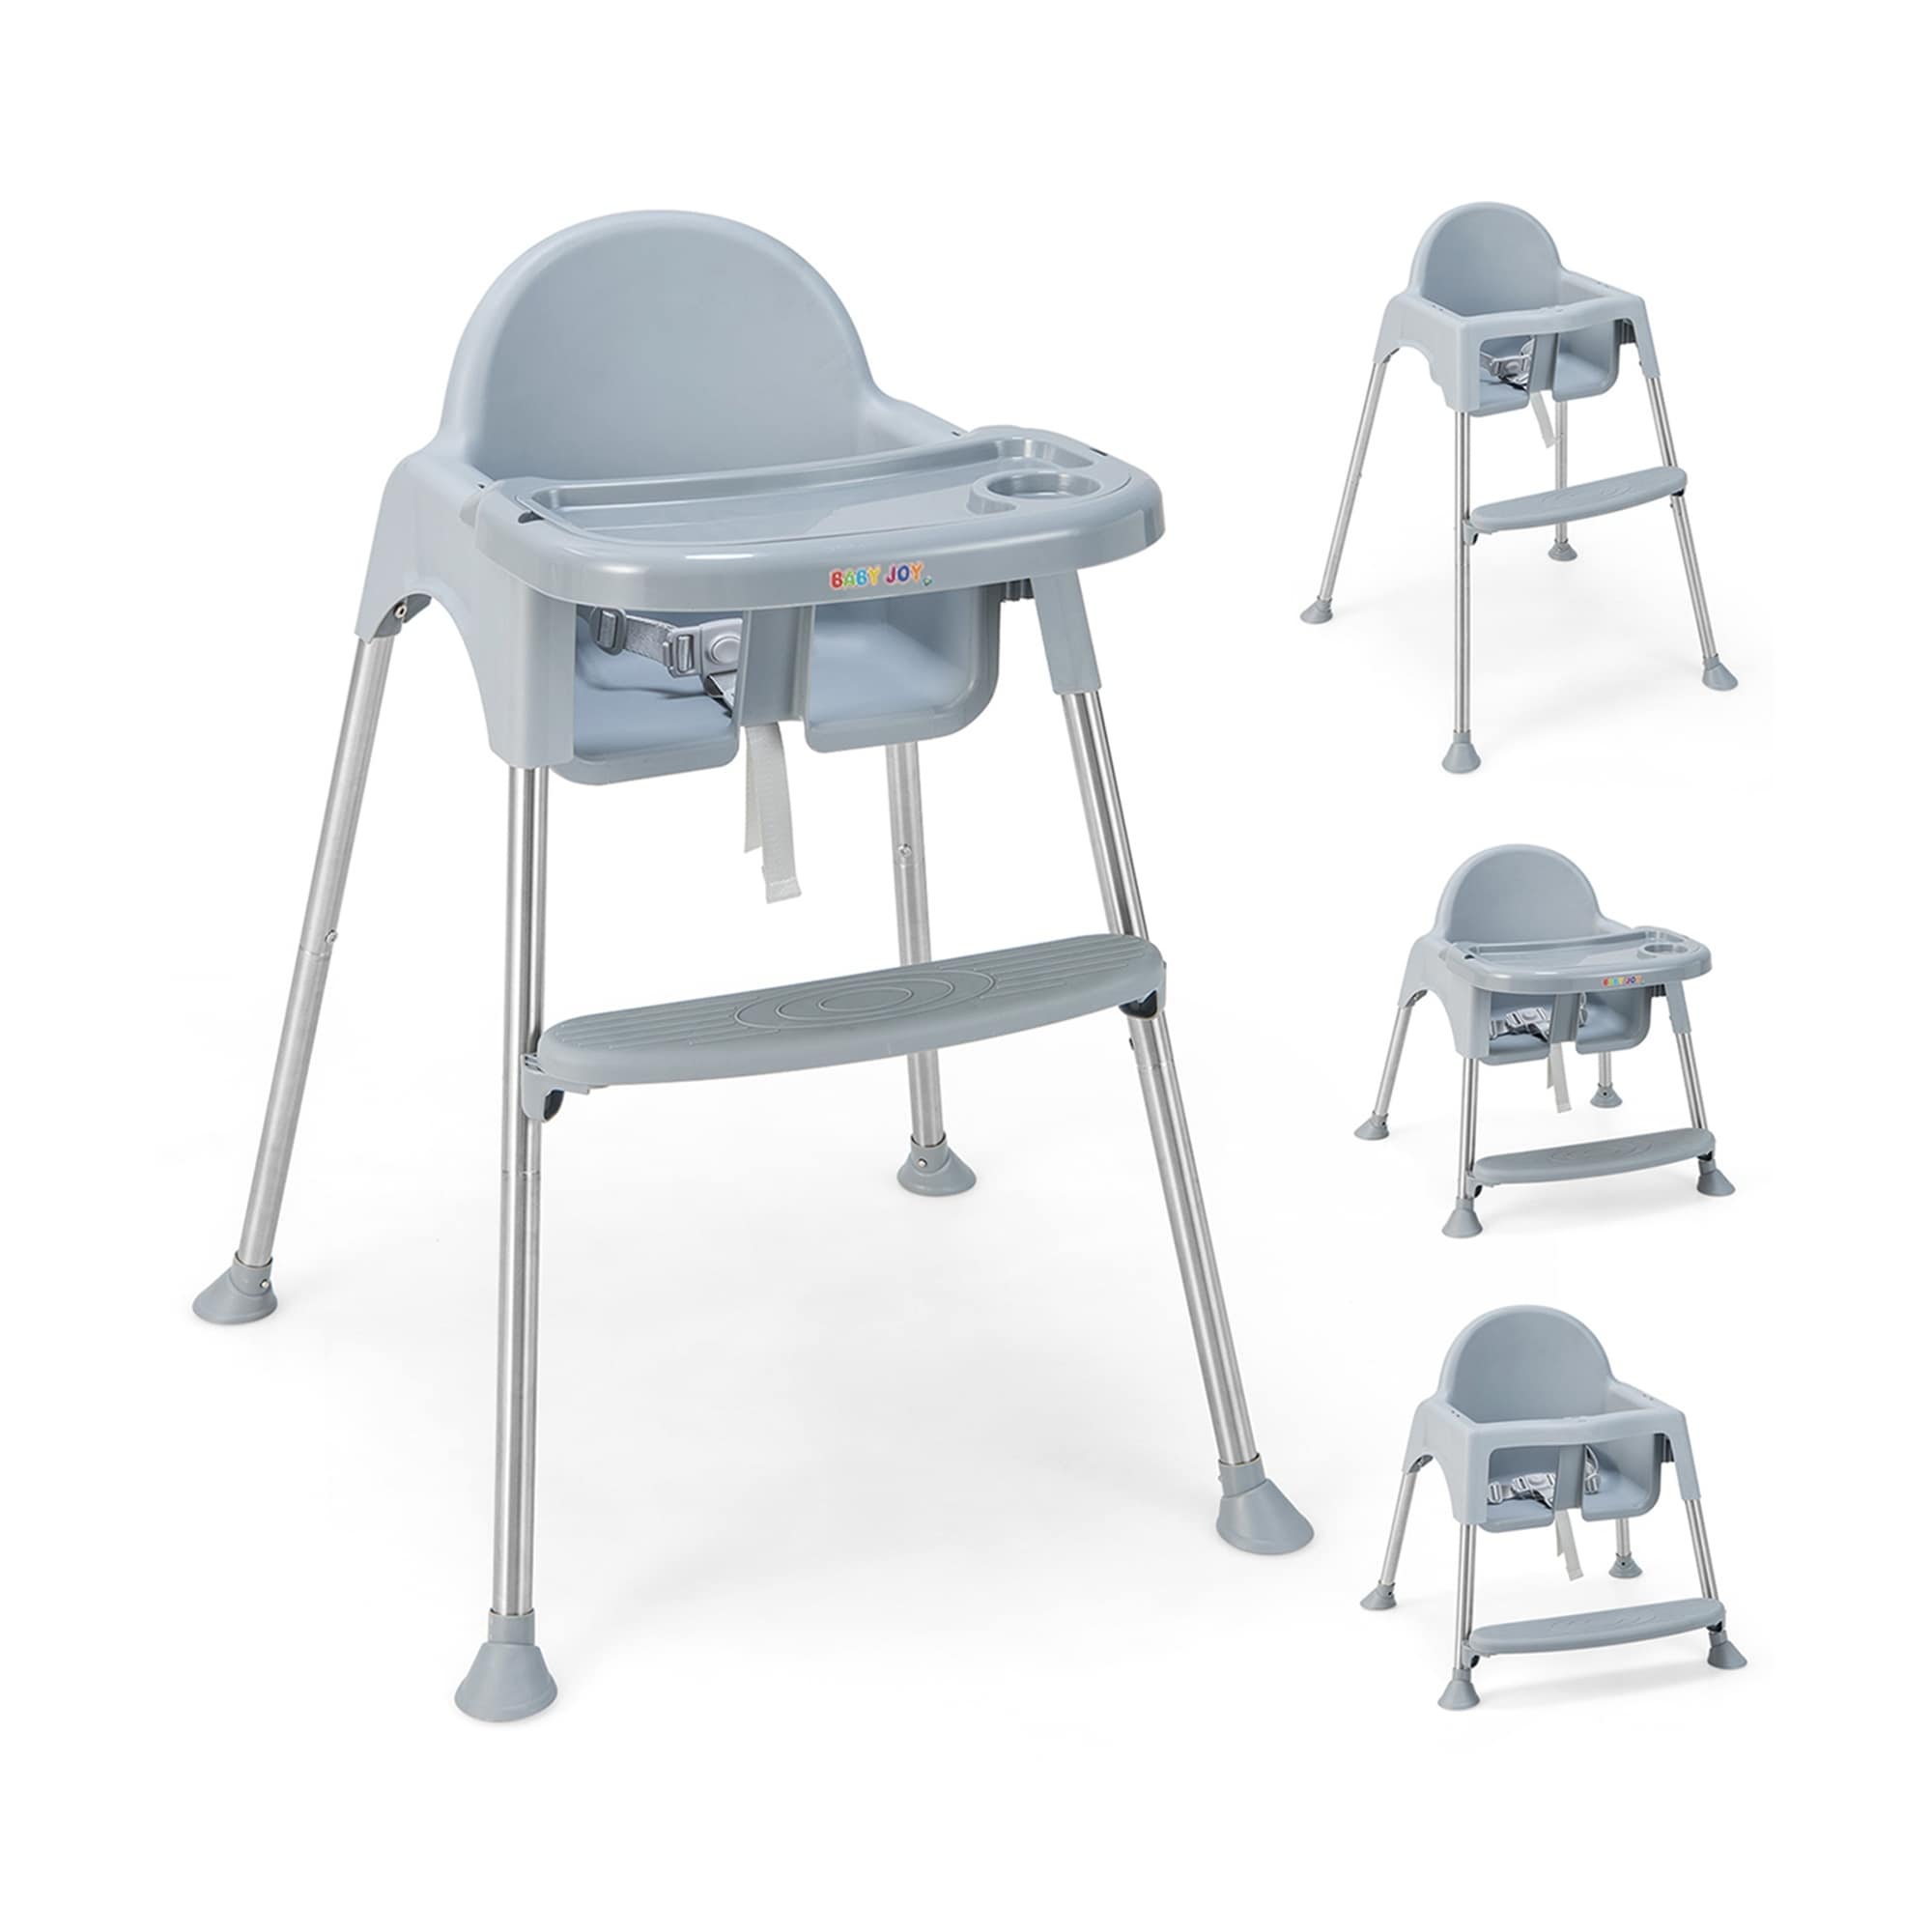 Babyjoy 4-in-1 Convertible Baby High Chair Feeding with Removable - See Details